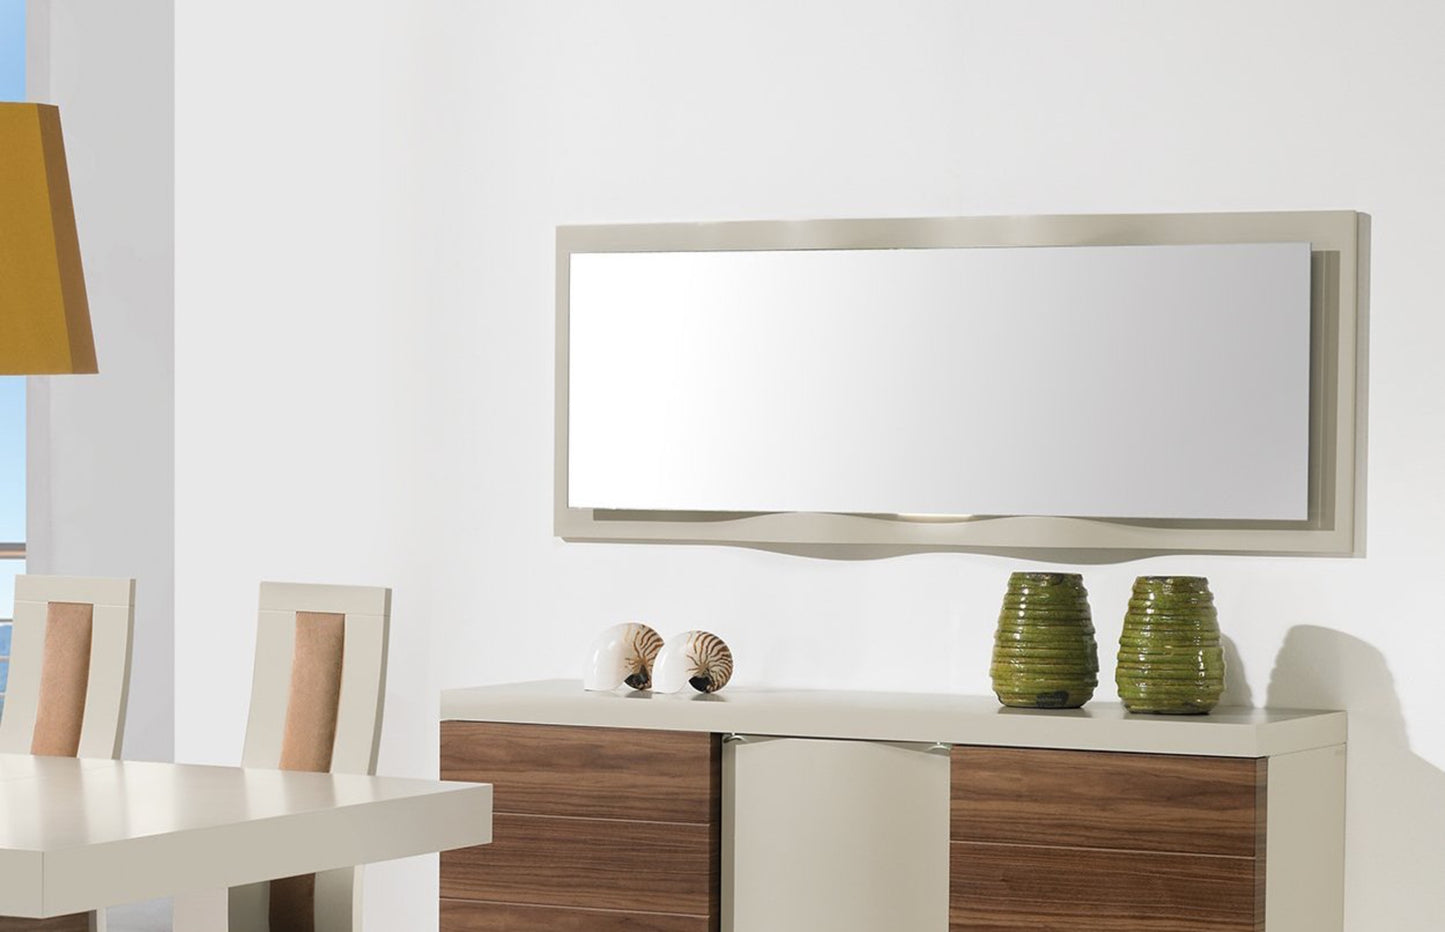 Oporto luxury dining mirror with handcrafted wave design, high gloss wood frame